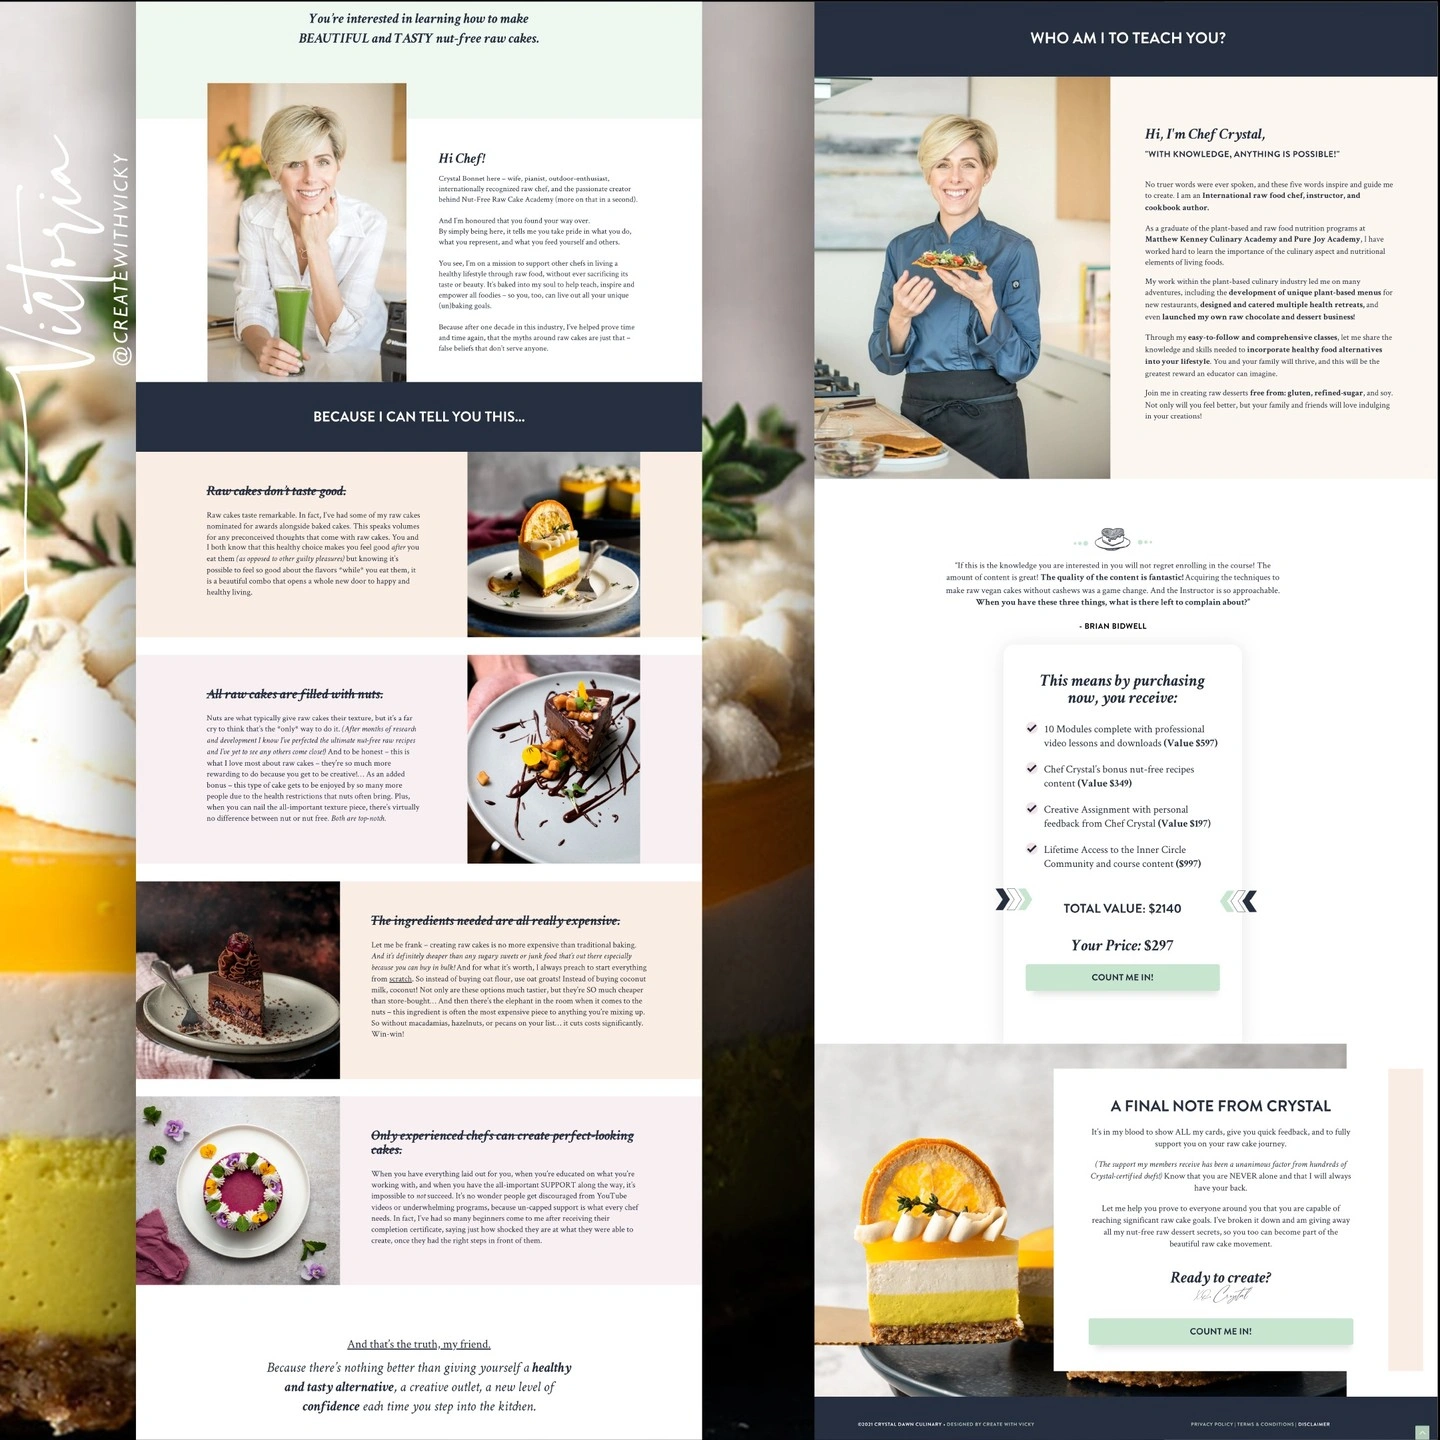 Professional-Culinary-Cake-Academy-Sales-Page-Designer-005